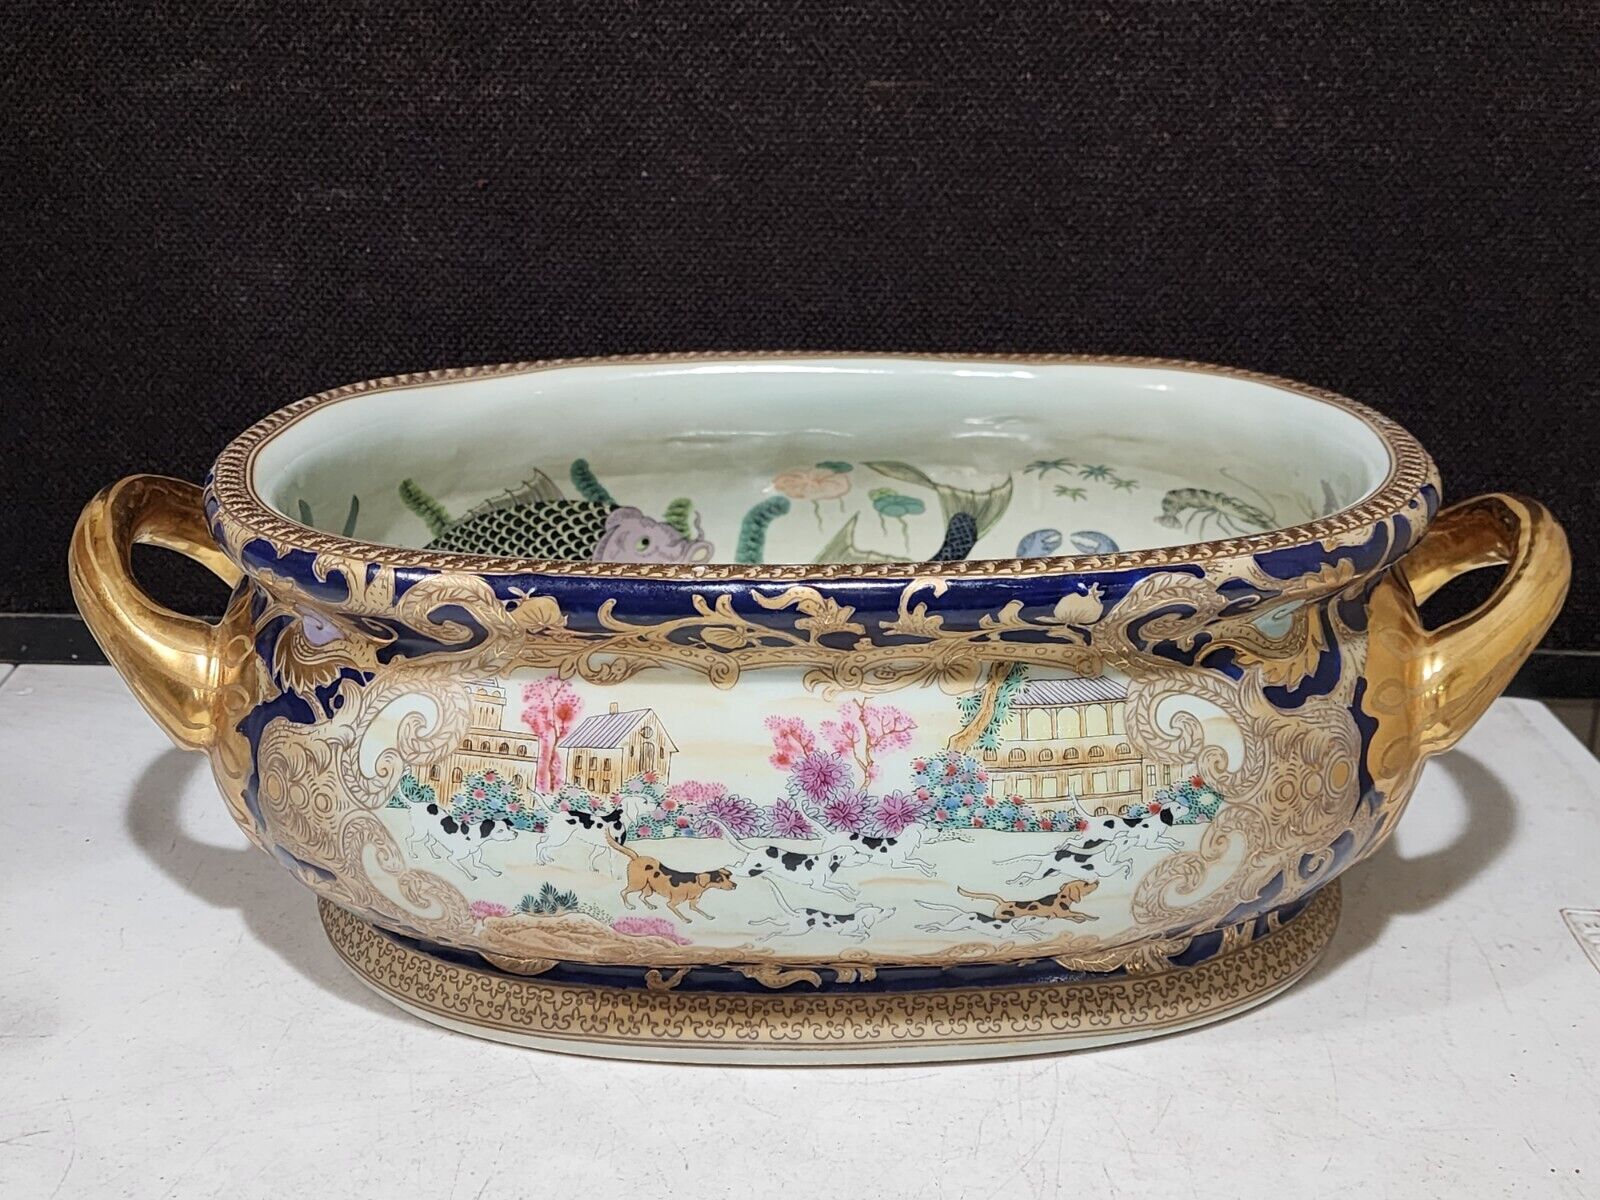 Vintage Chinese Foot Bath Dogs Playing in Field With Koi Heavy Gold Trim